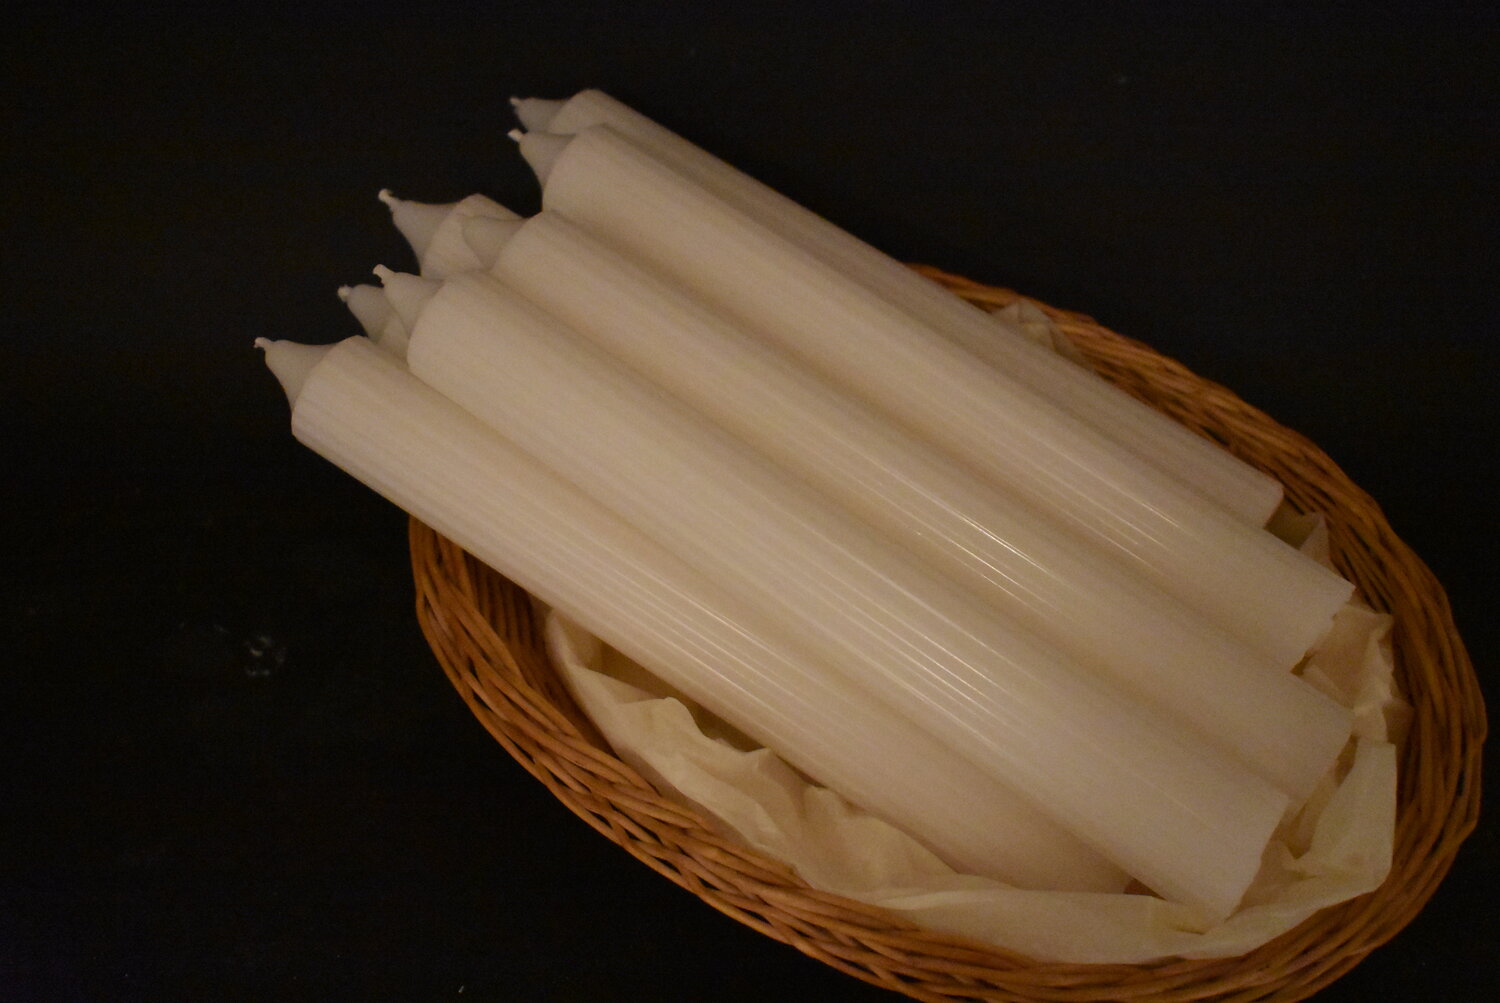 Candle White 6pack in Packet C20